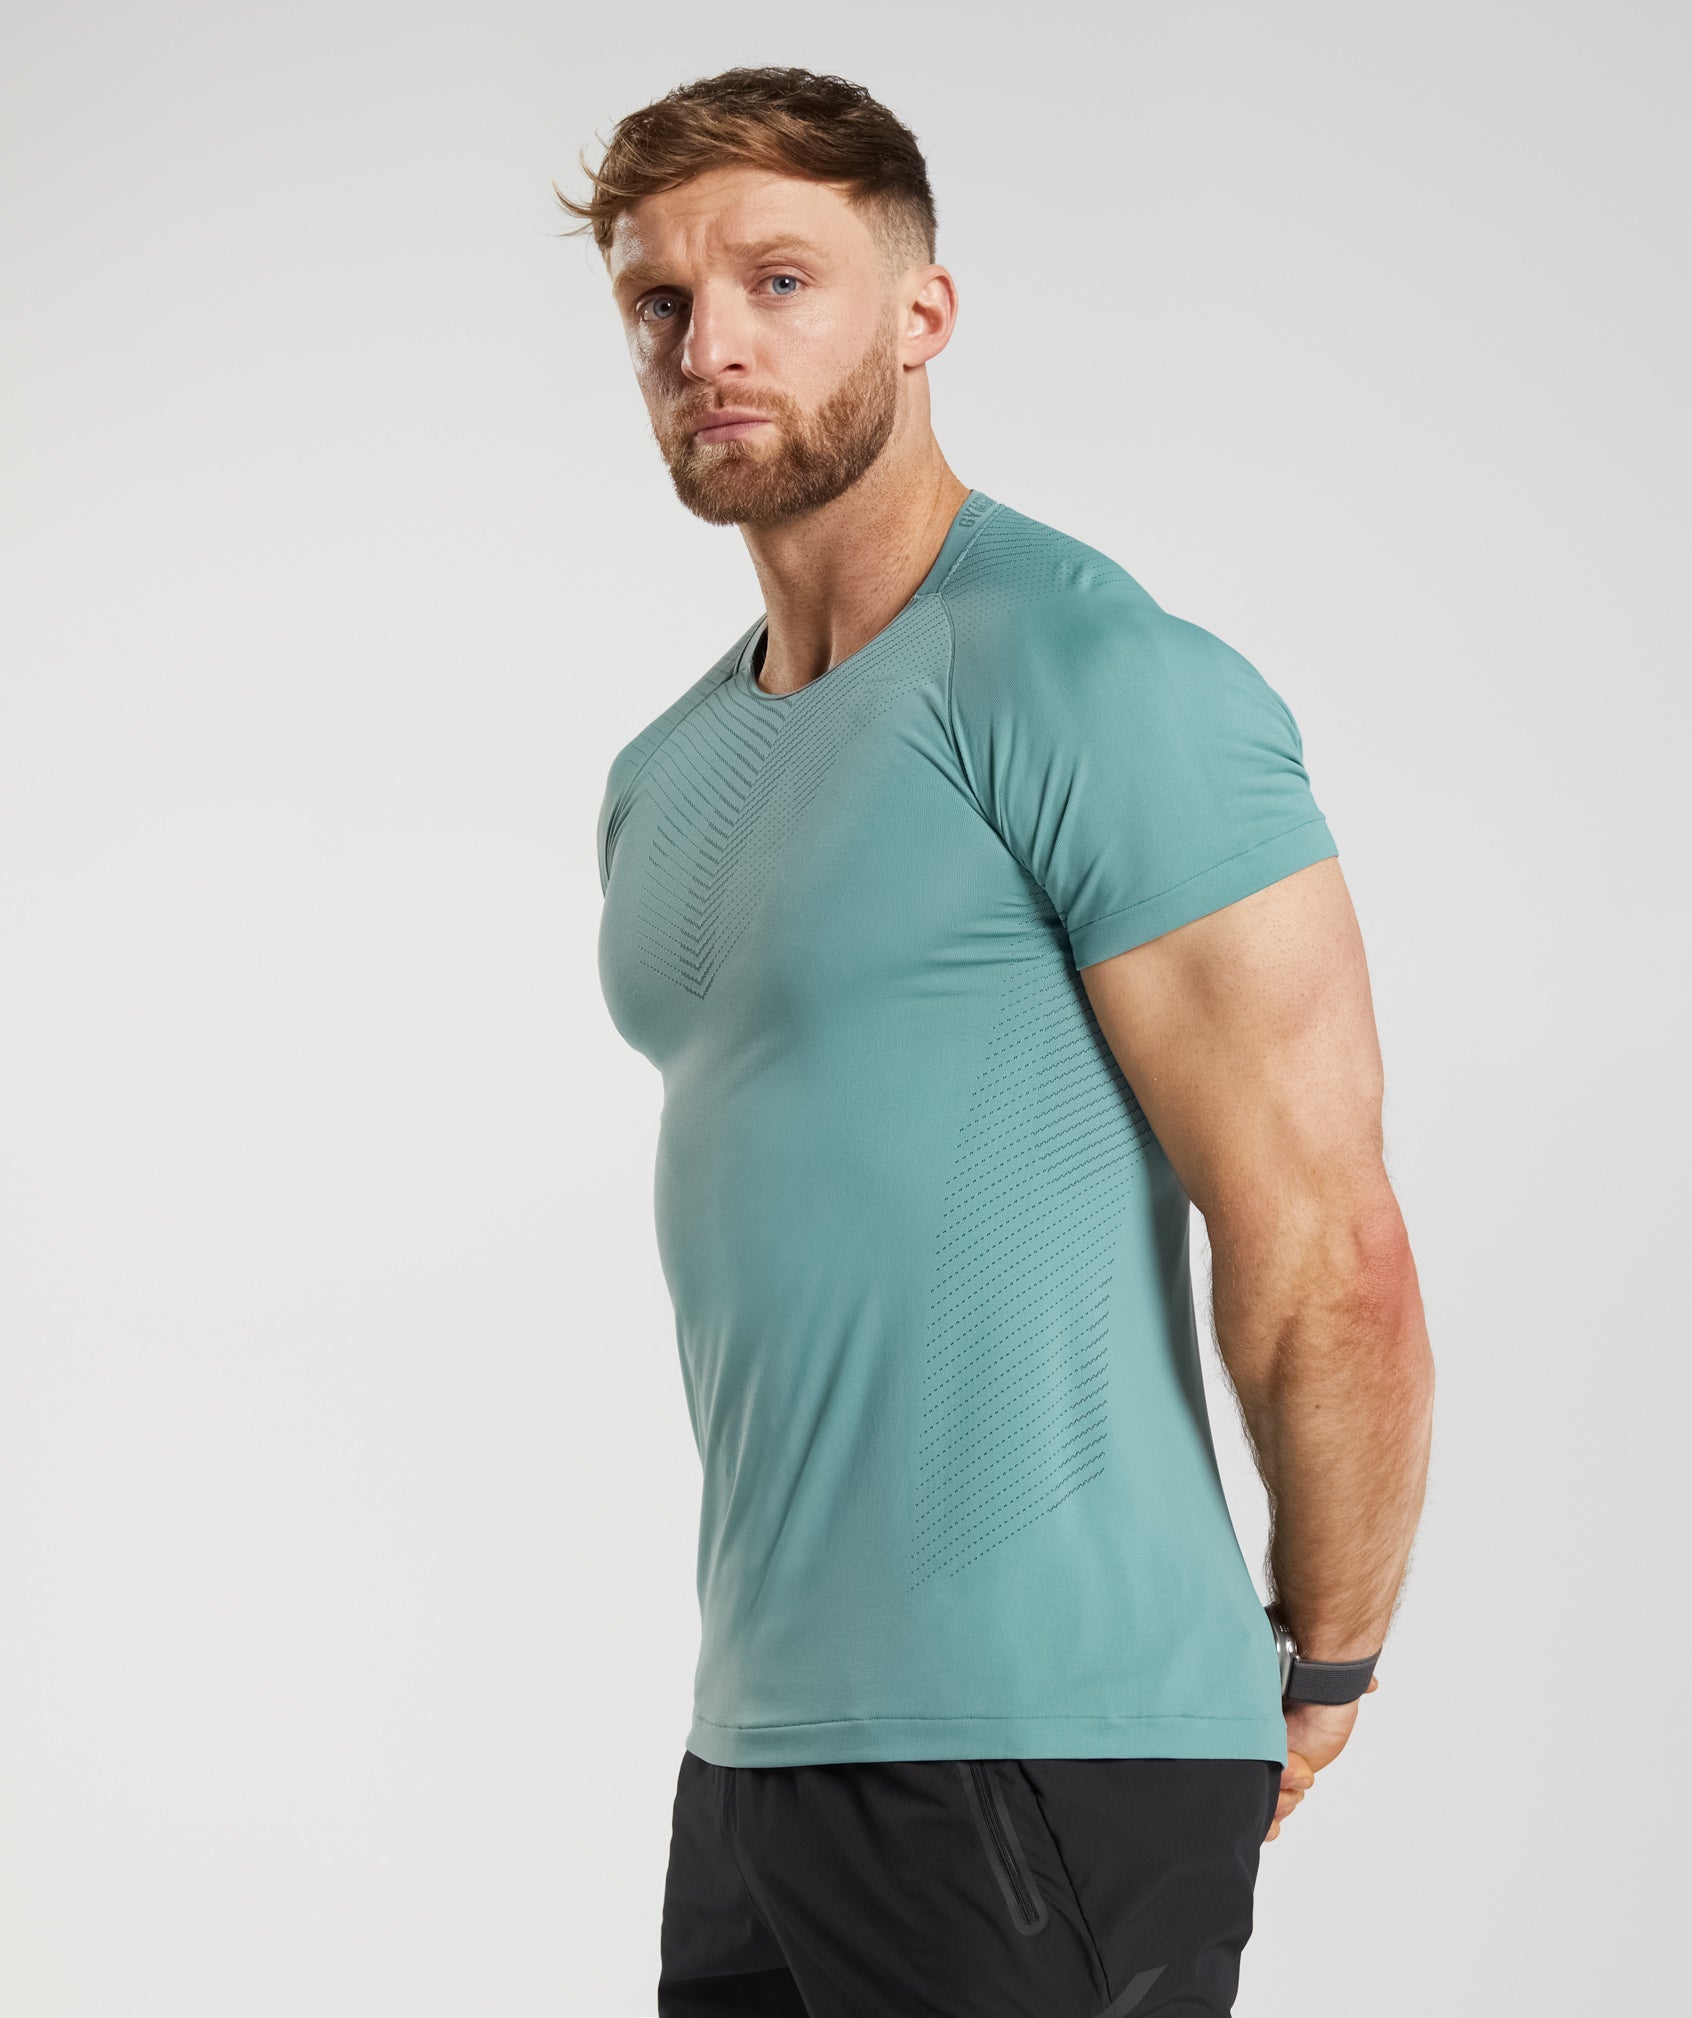 Apex Seamless T-Shirt in Ink Teal/Silhouette Grey